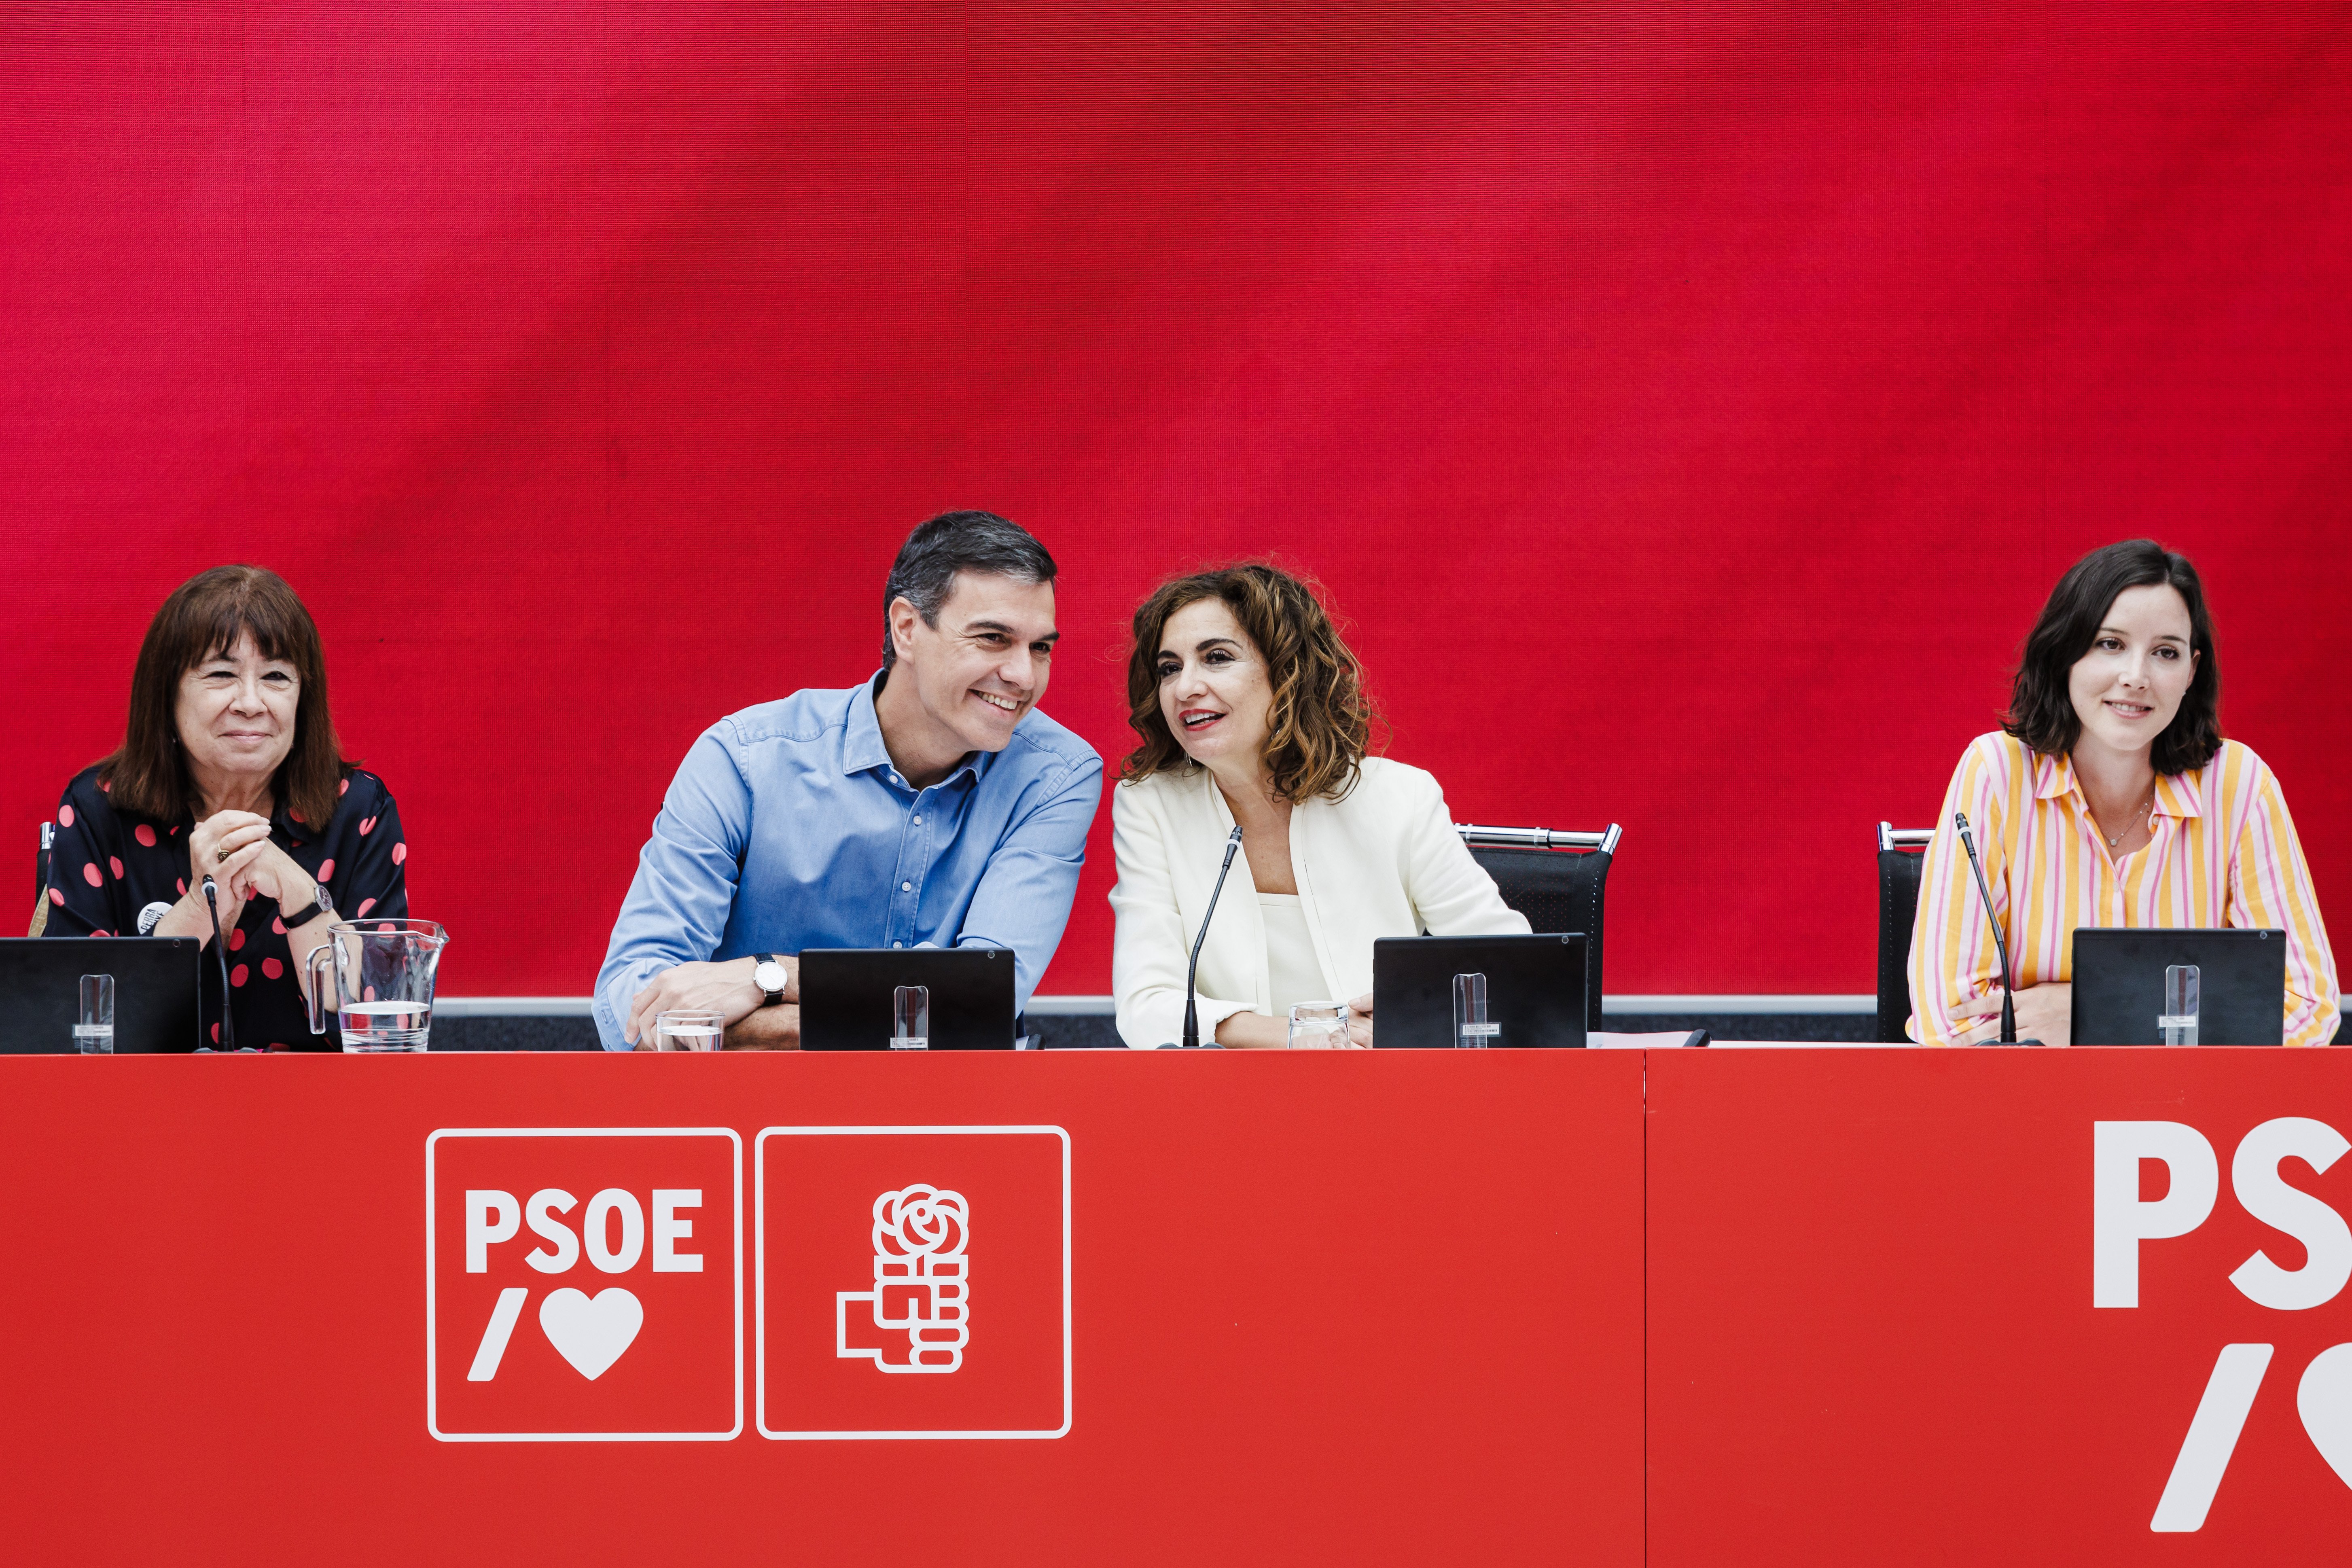 Sánchez prescribes calm to Junts: "Democracy will find the formula for governability".